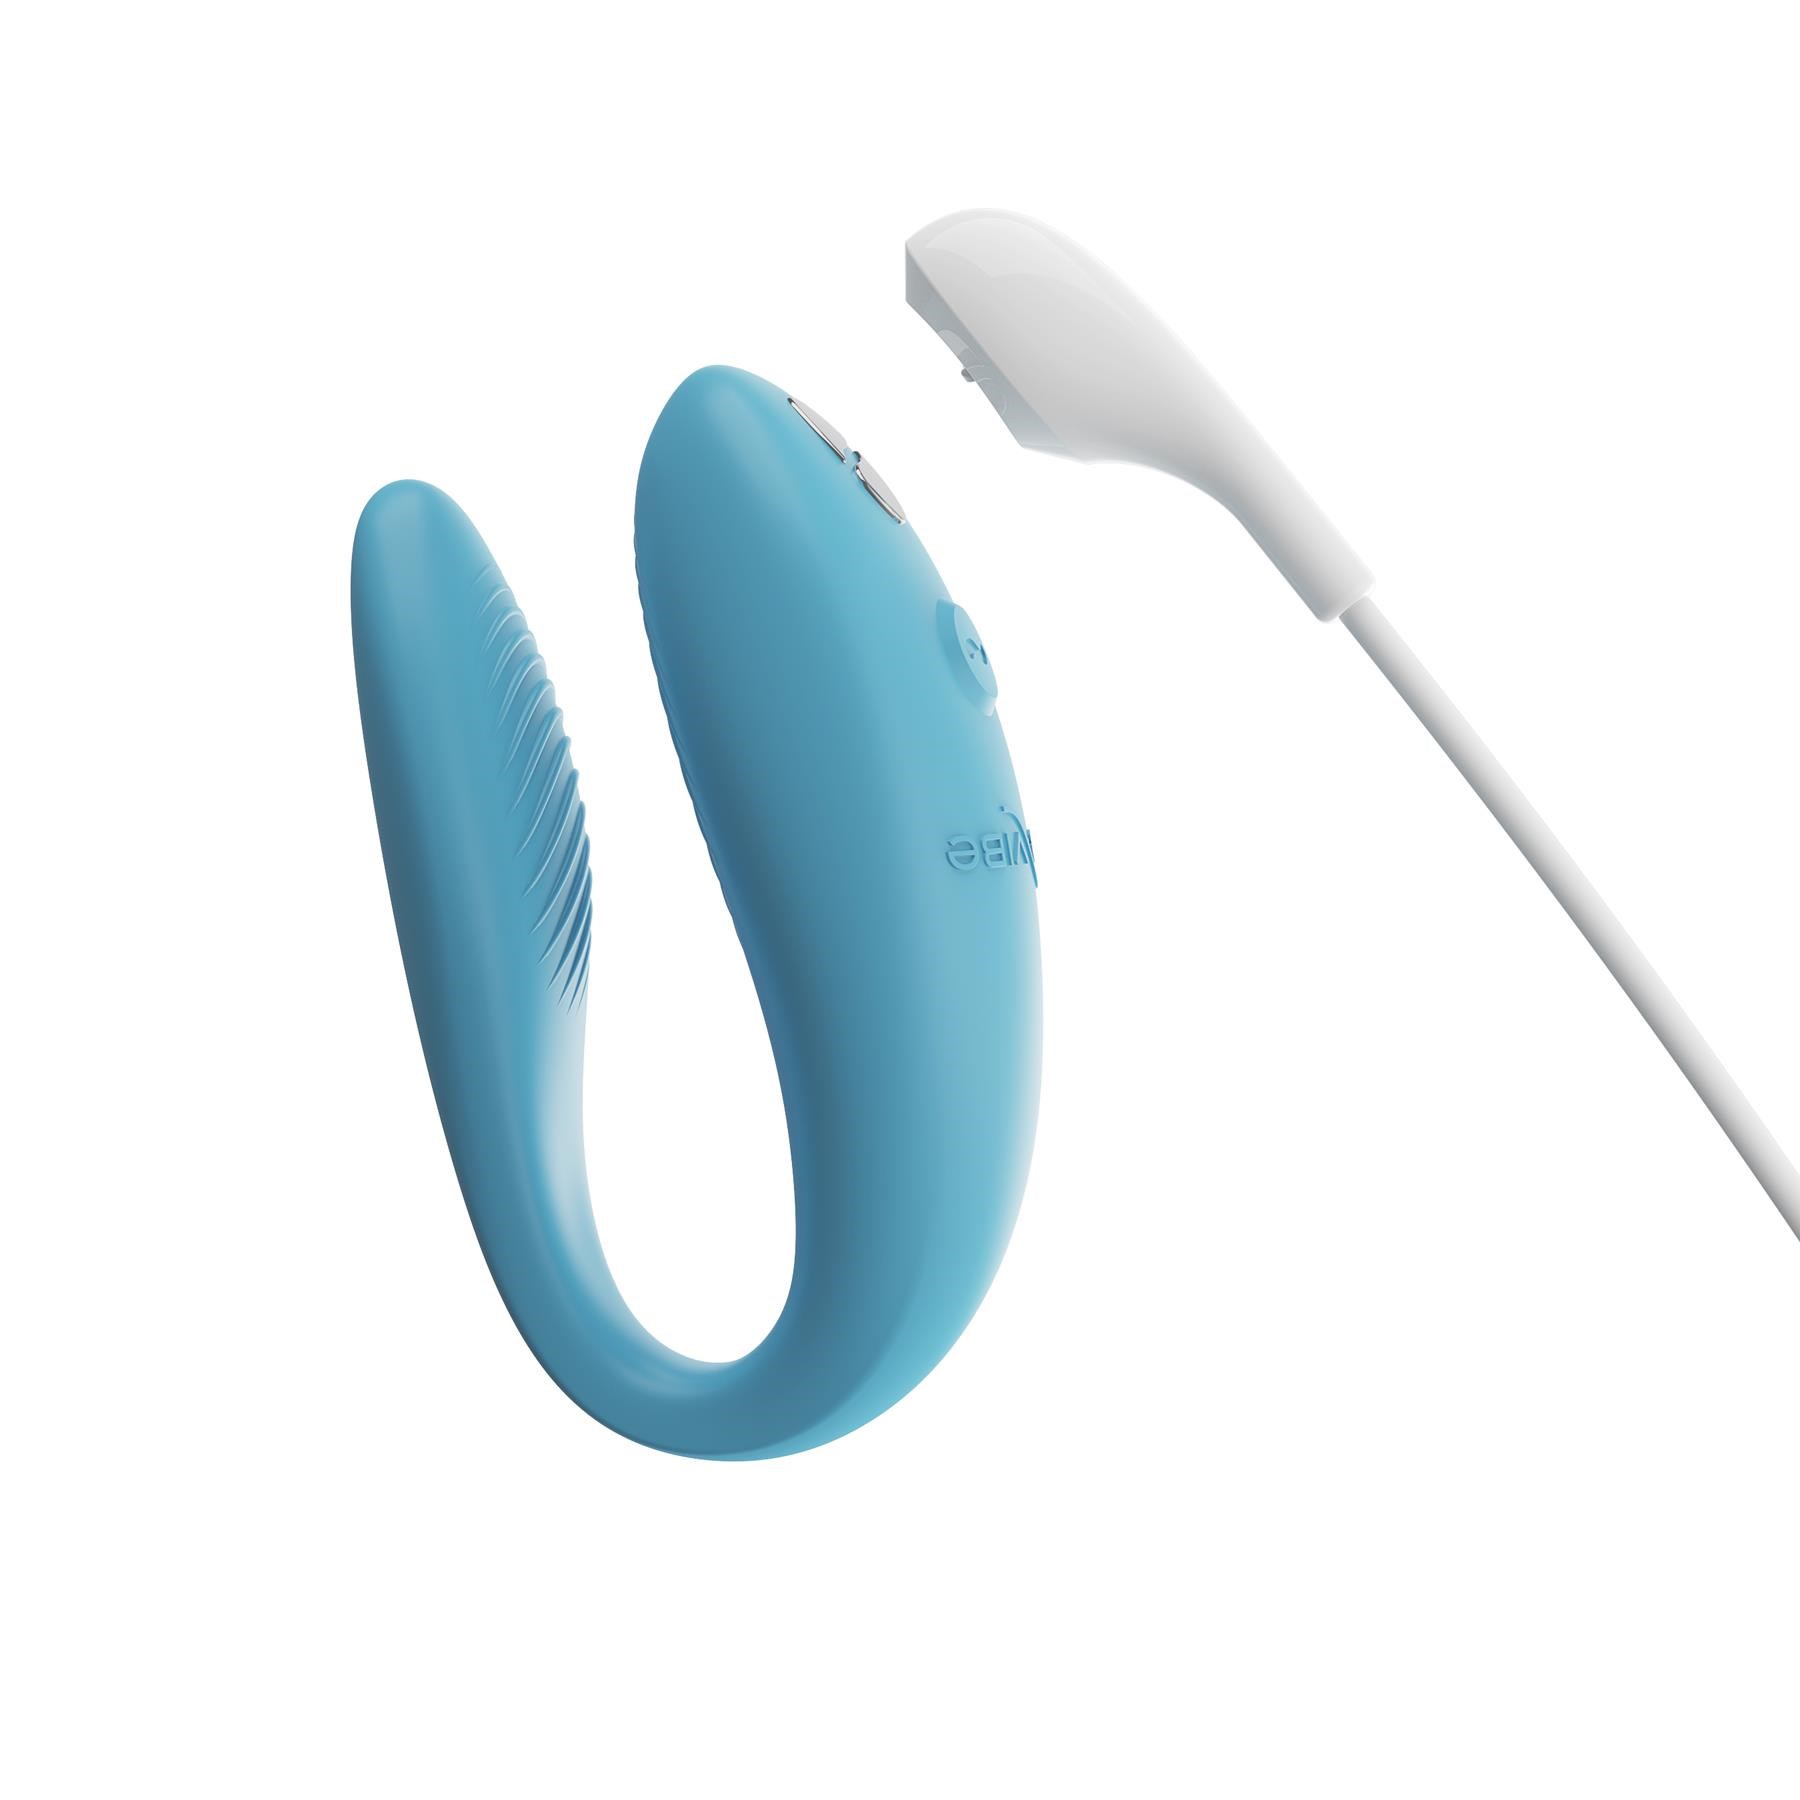 We-Vibe Sync Go Couples Vibrator- Showing Where Charging Cable is Placed